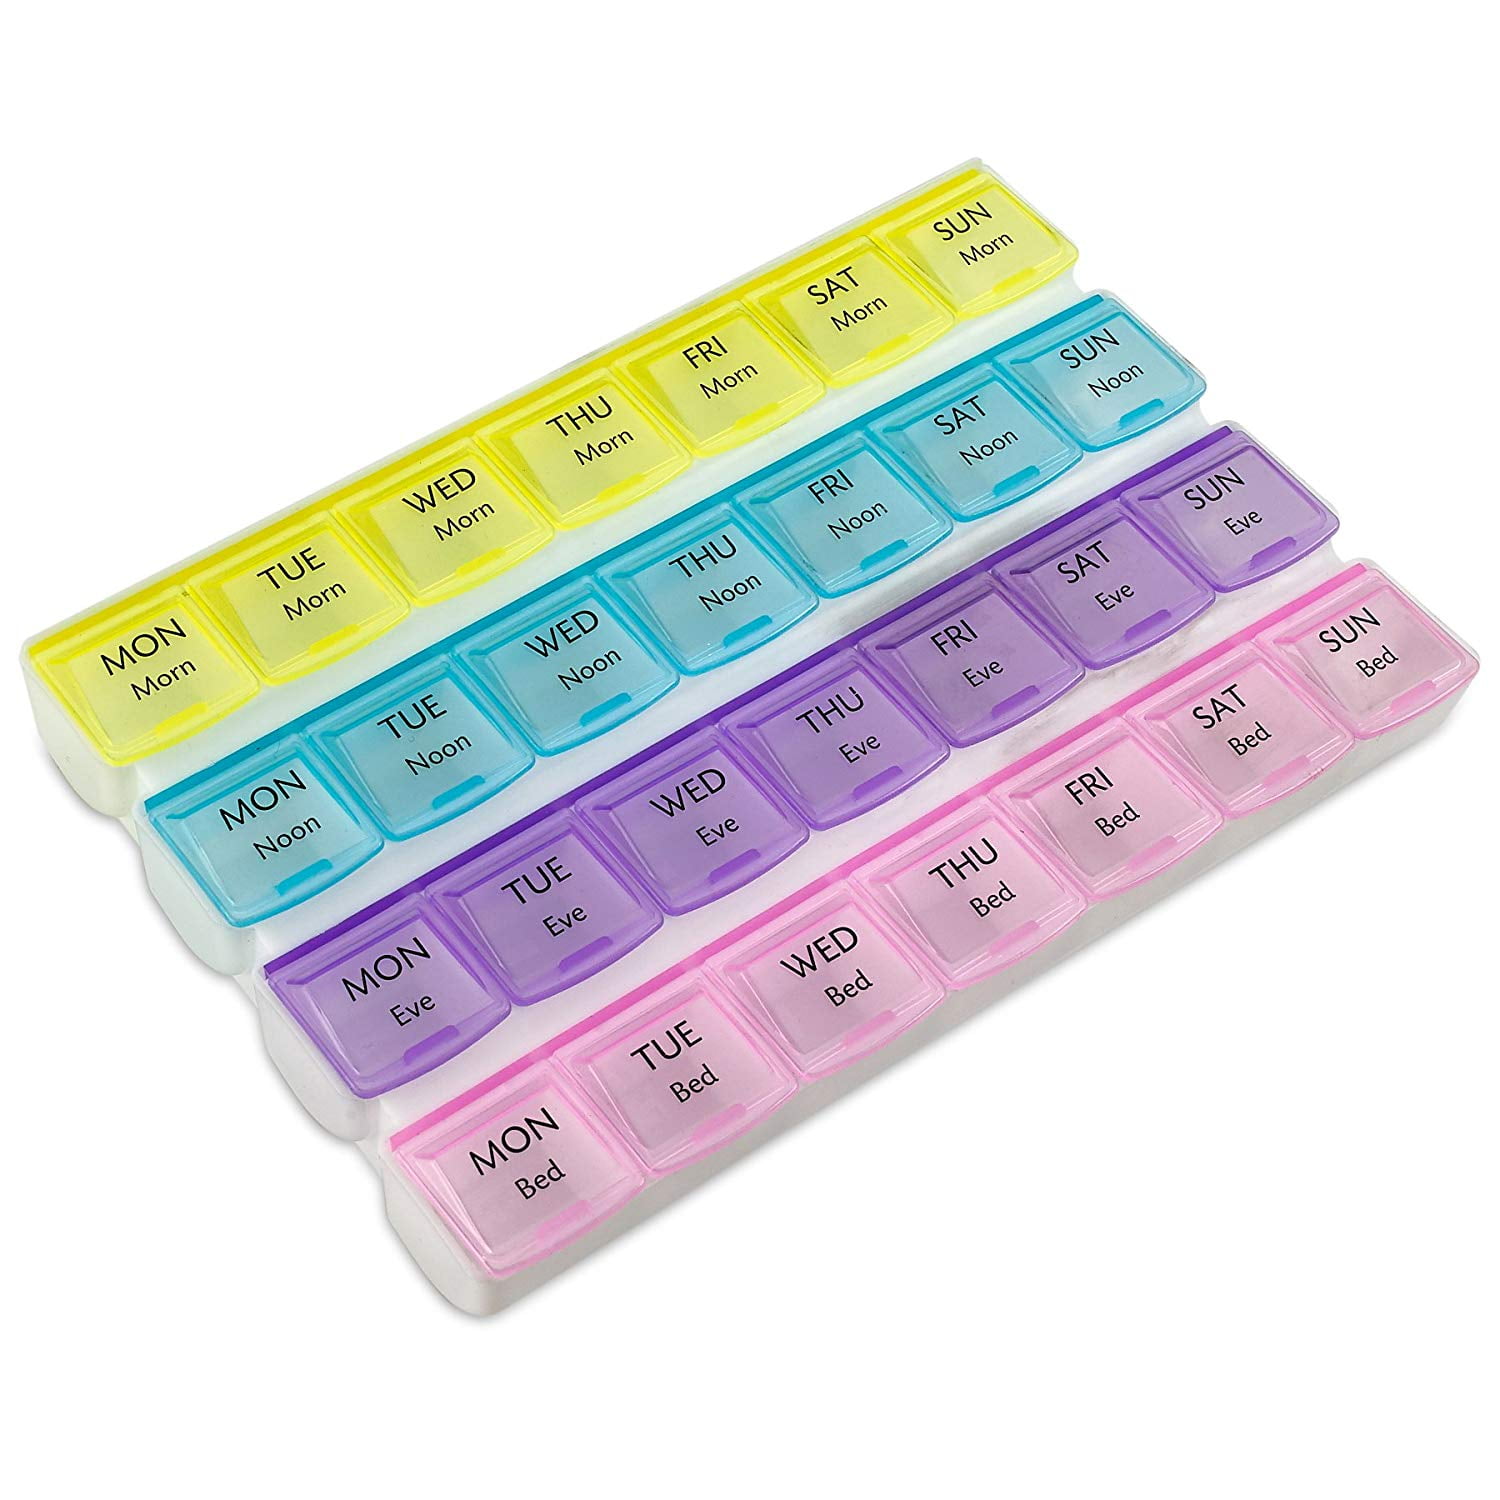 weekly-pill-organizer-with-28-compartments-by-organize-your-vitamins